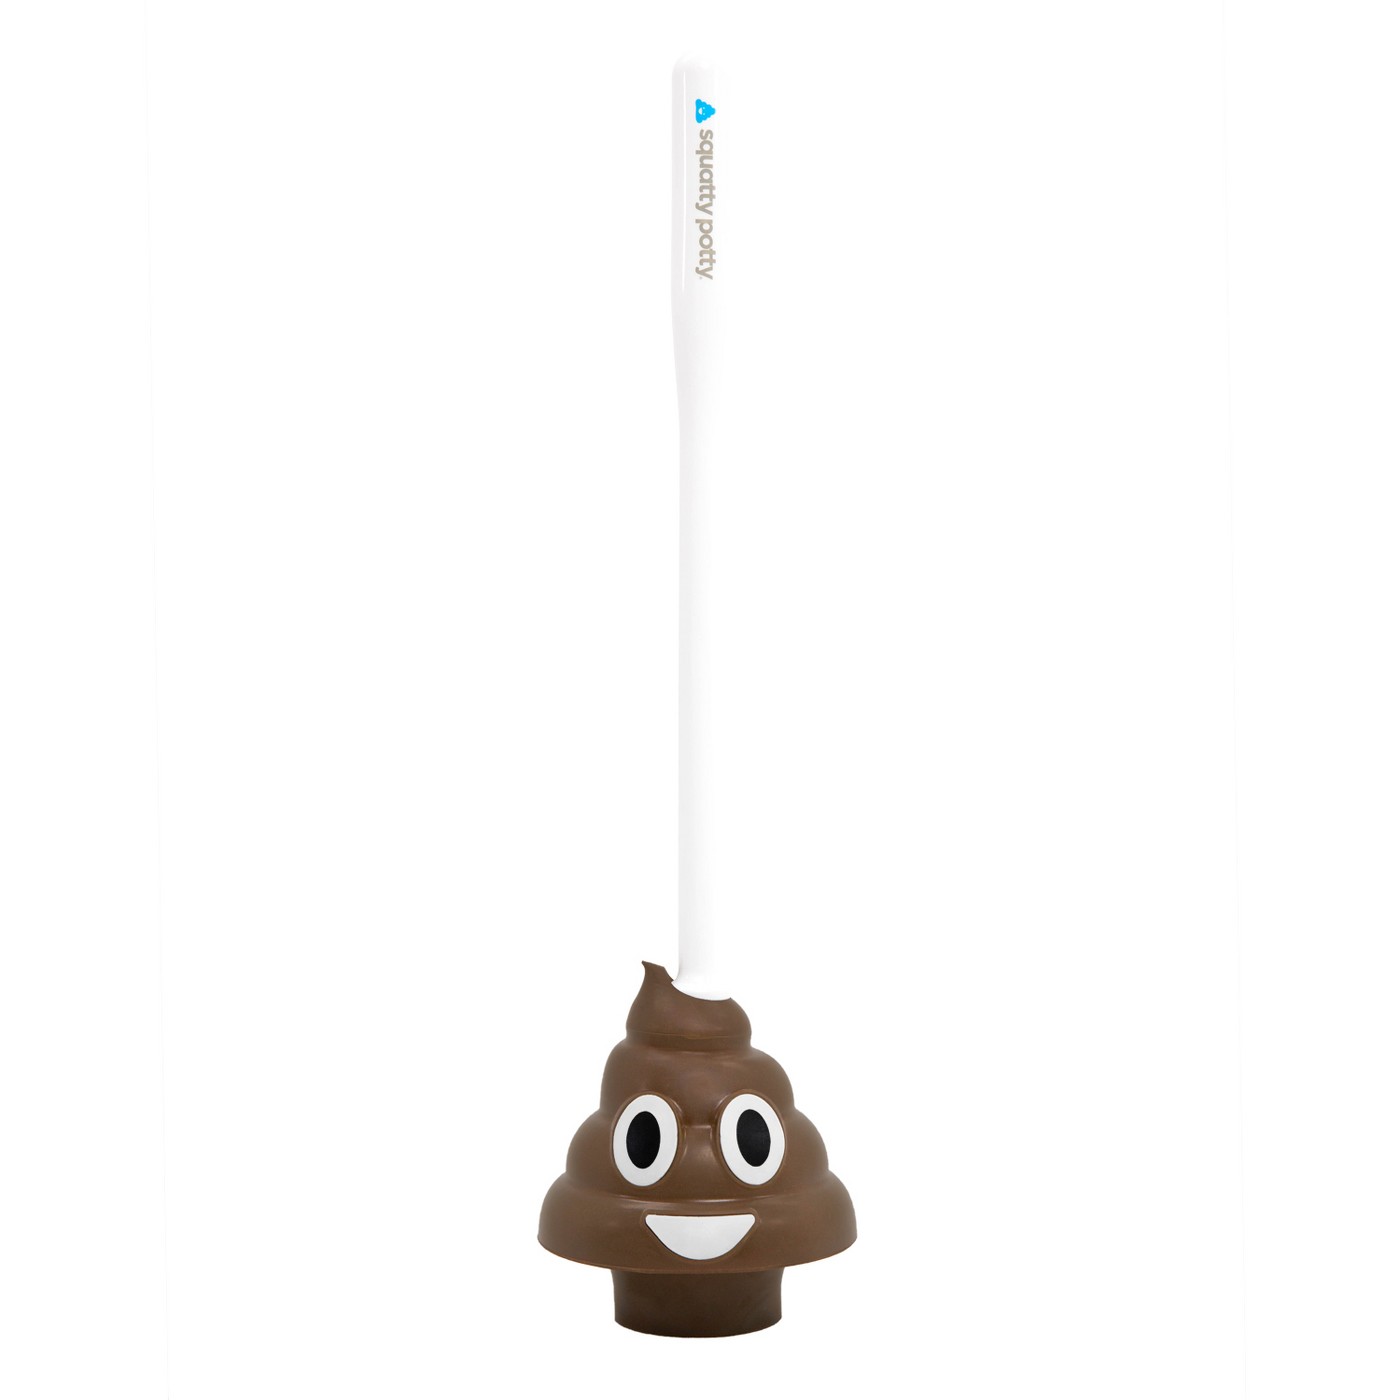 Poo Emoji Plunger Rubber Brown - Squatty Potty - image 1 of 2